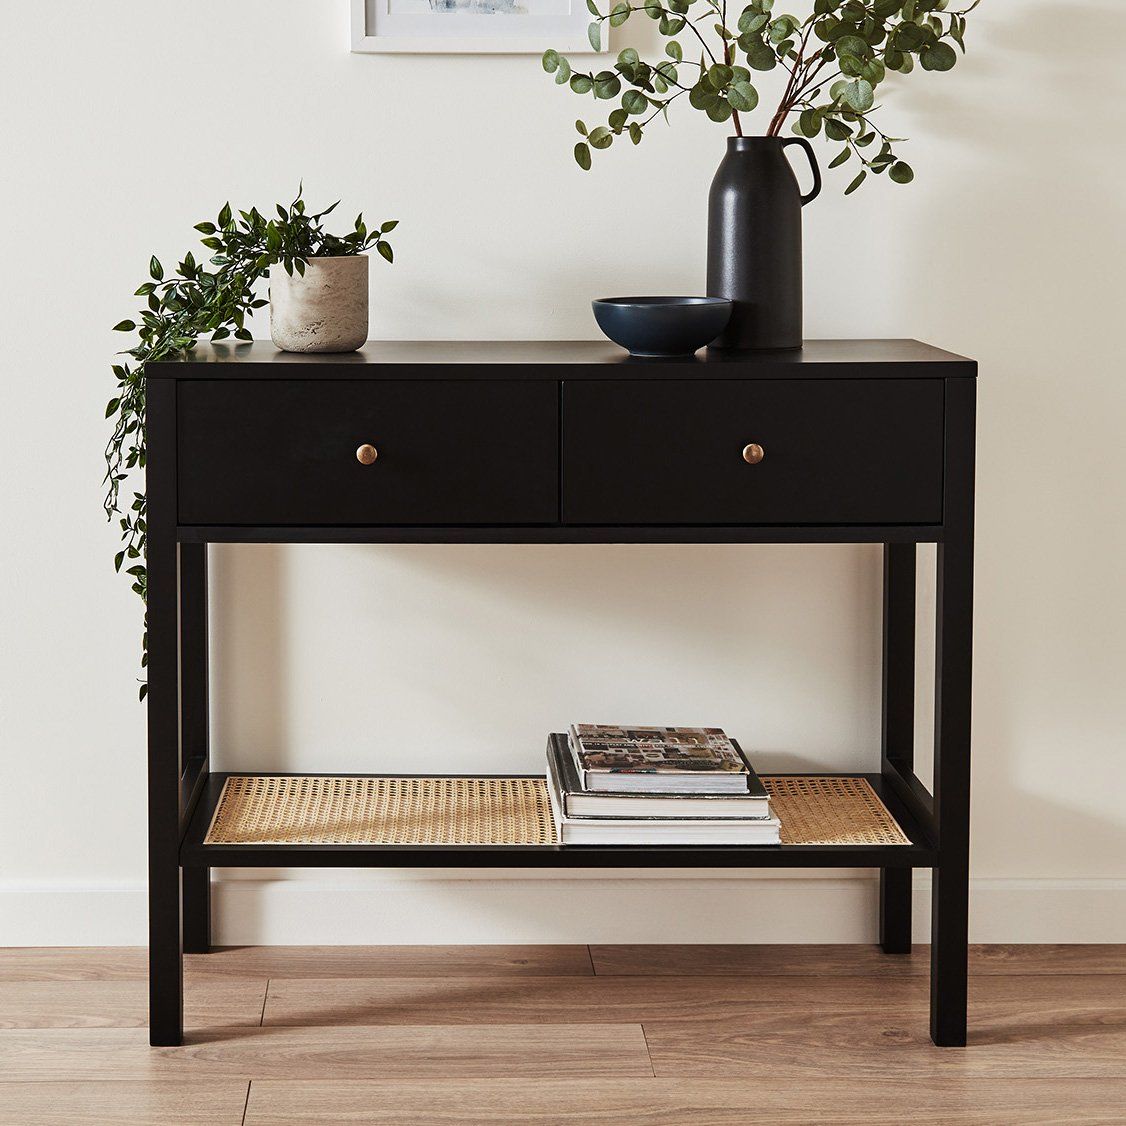 Console Tables - Laura James Ireland